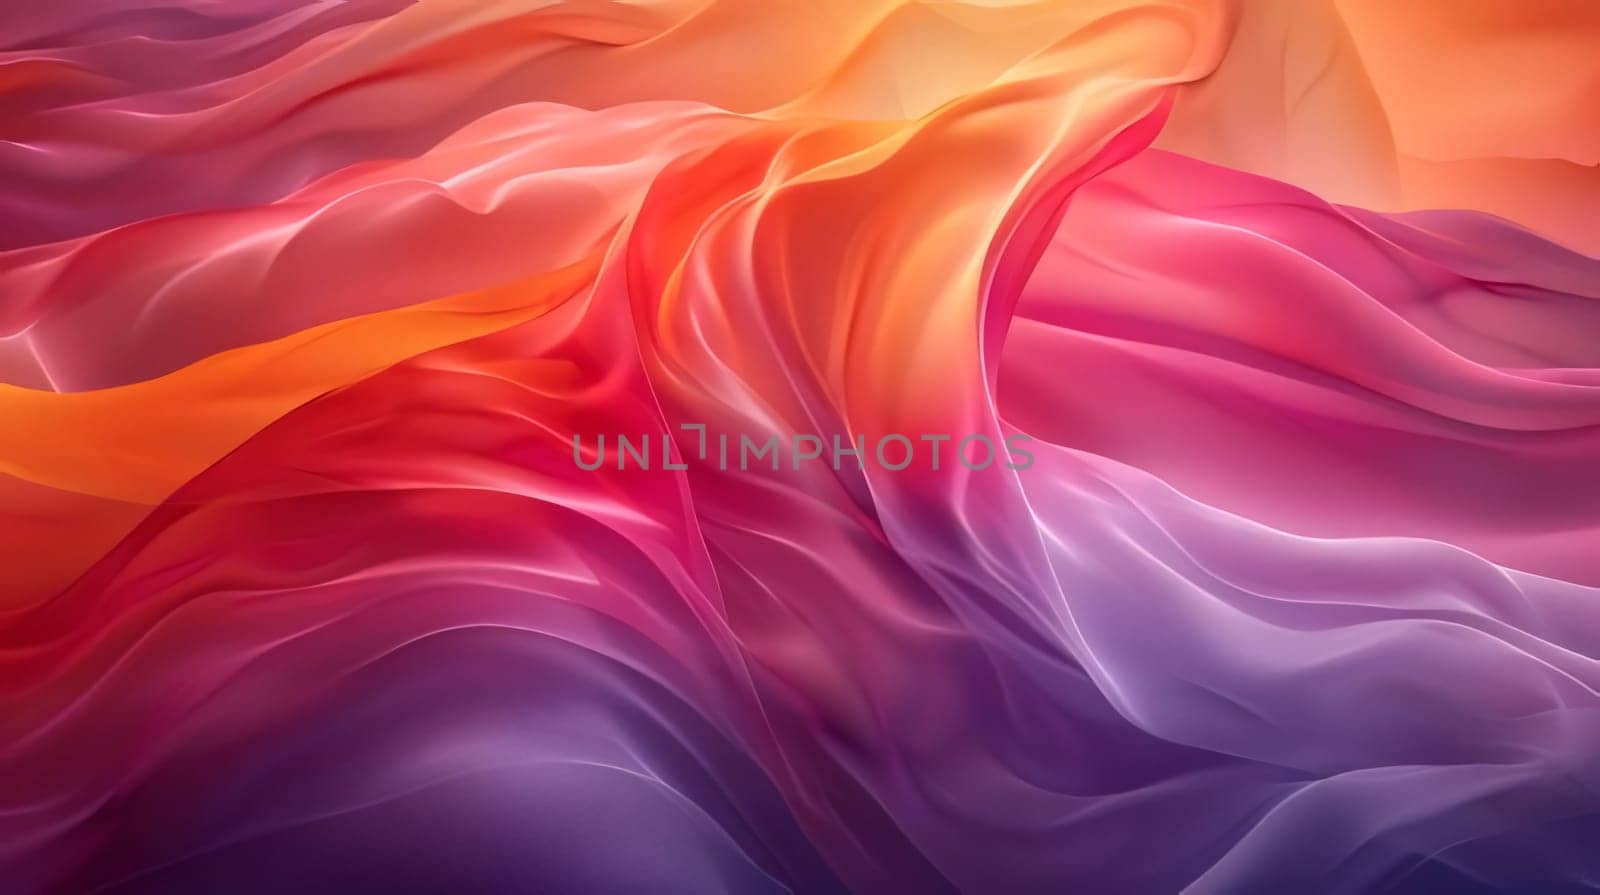 Abstract background design: abstract background of colored wavy silk or satin luxury cloth